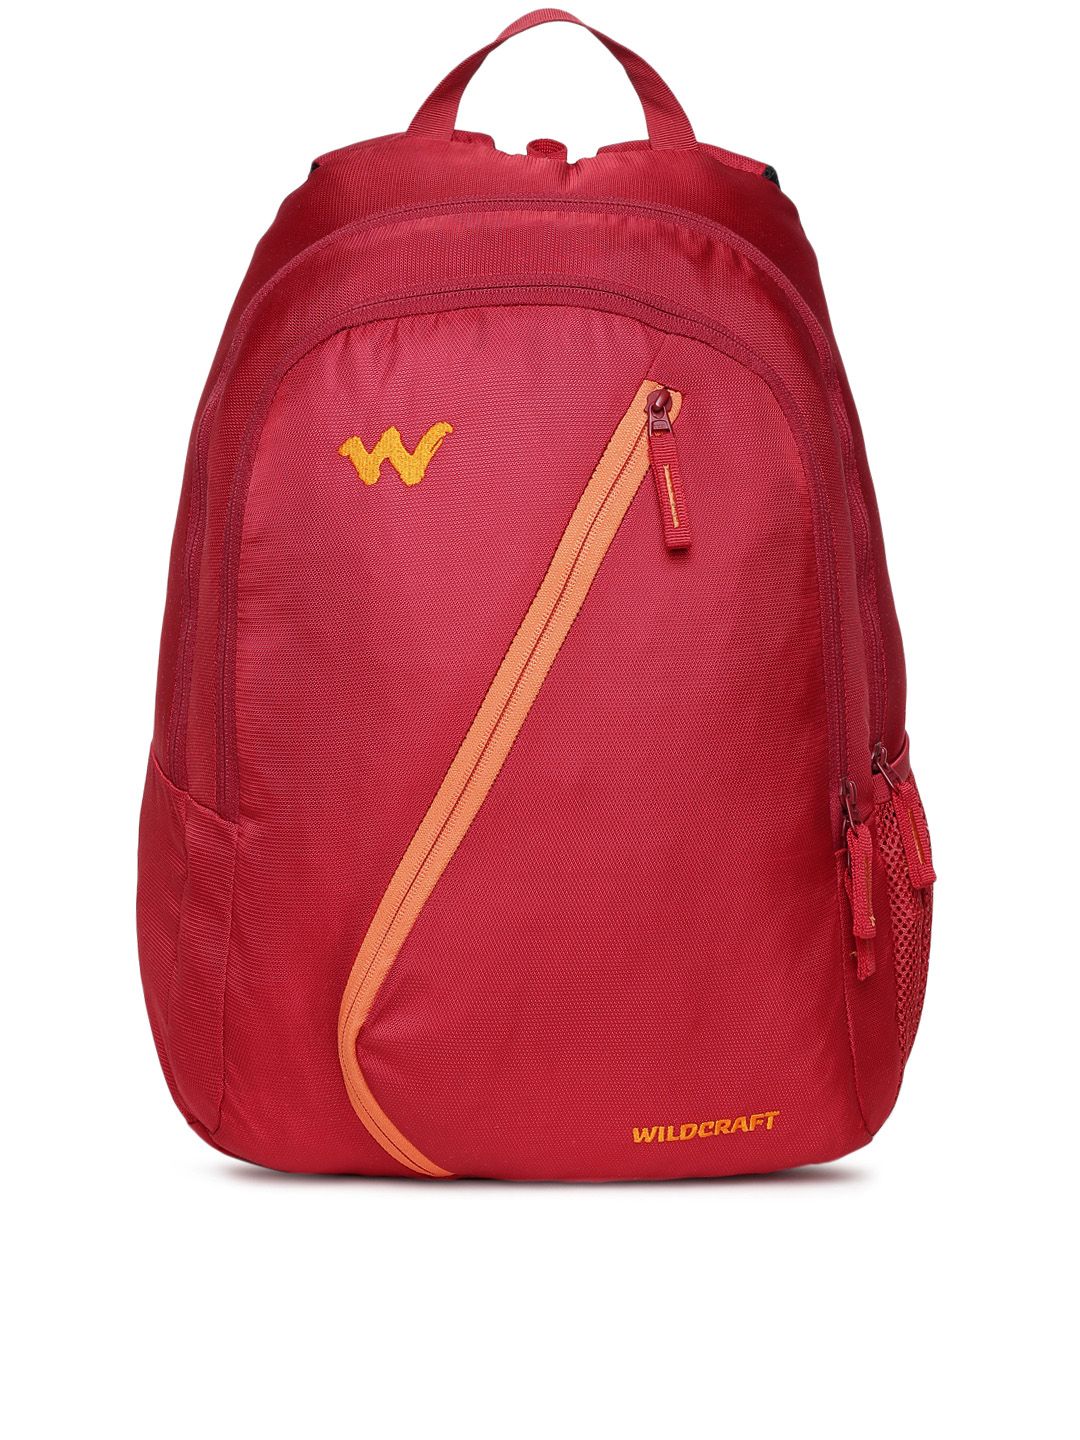 Wildcraft Unisex Red Brand Logo Backpack Price in India